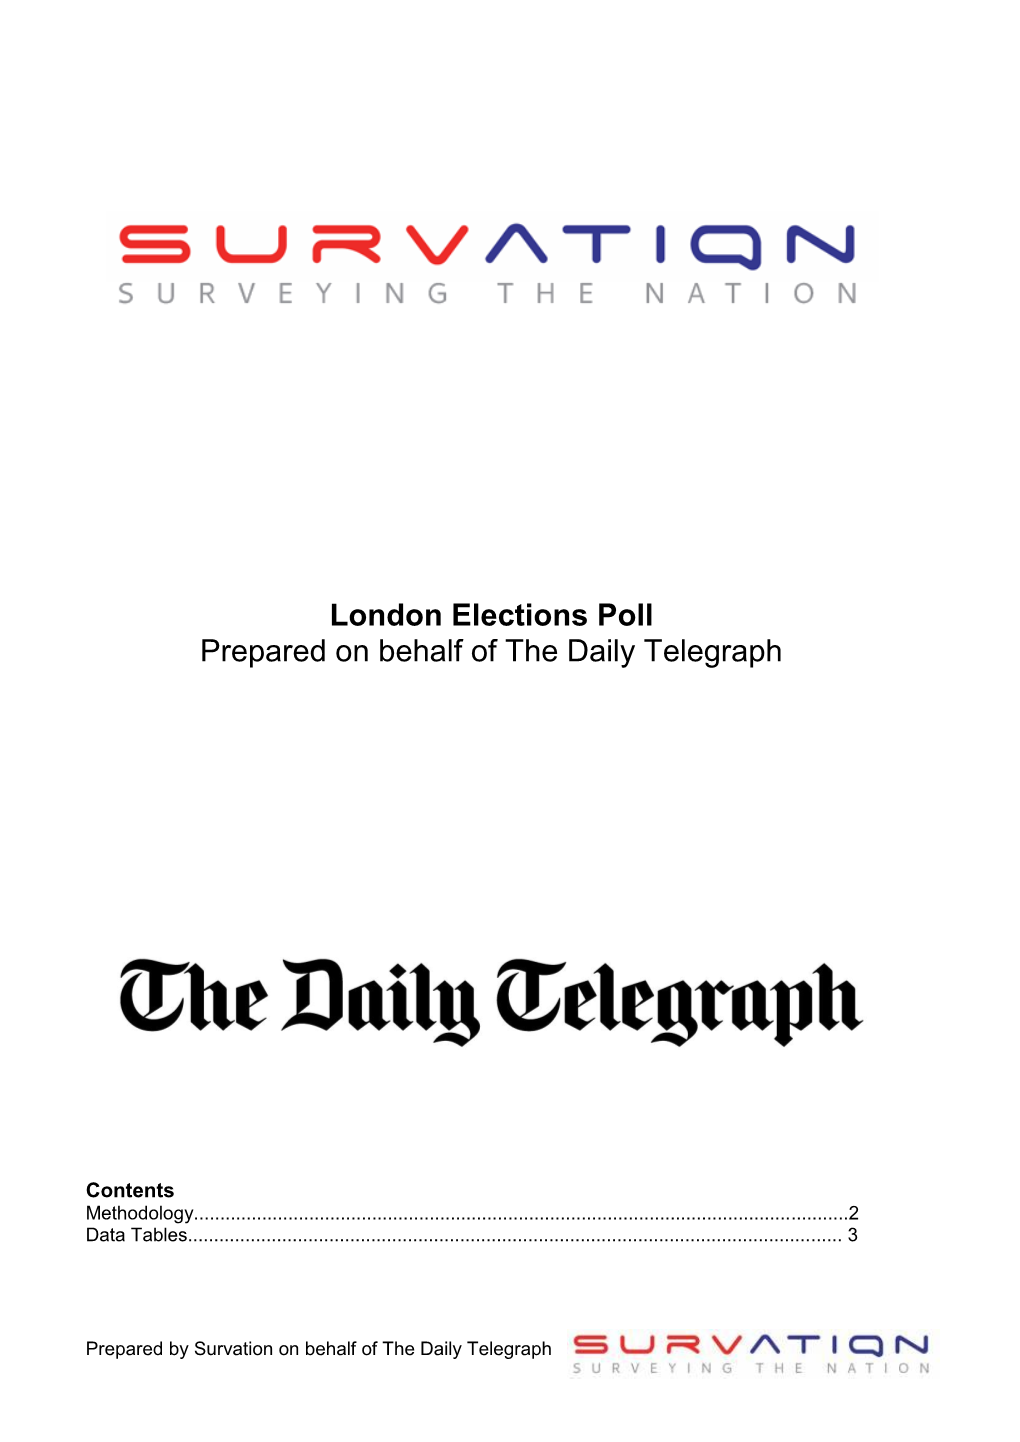 London Elections Poll Prepared on Behalf of the Daily Telegraph